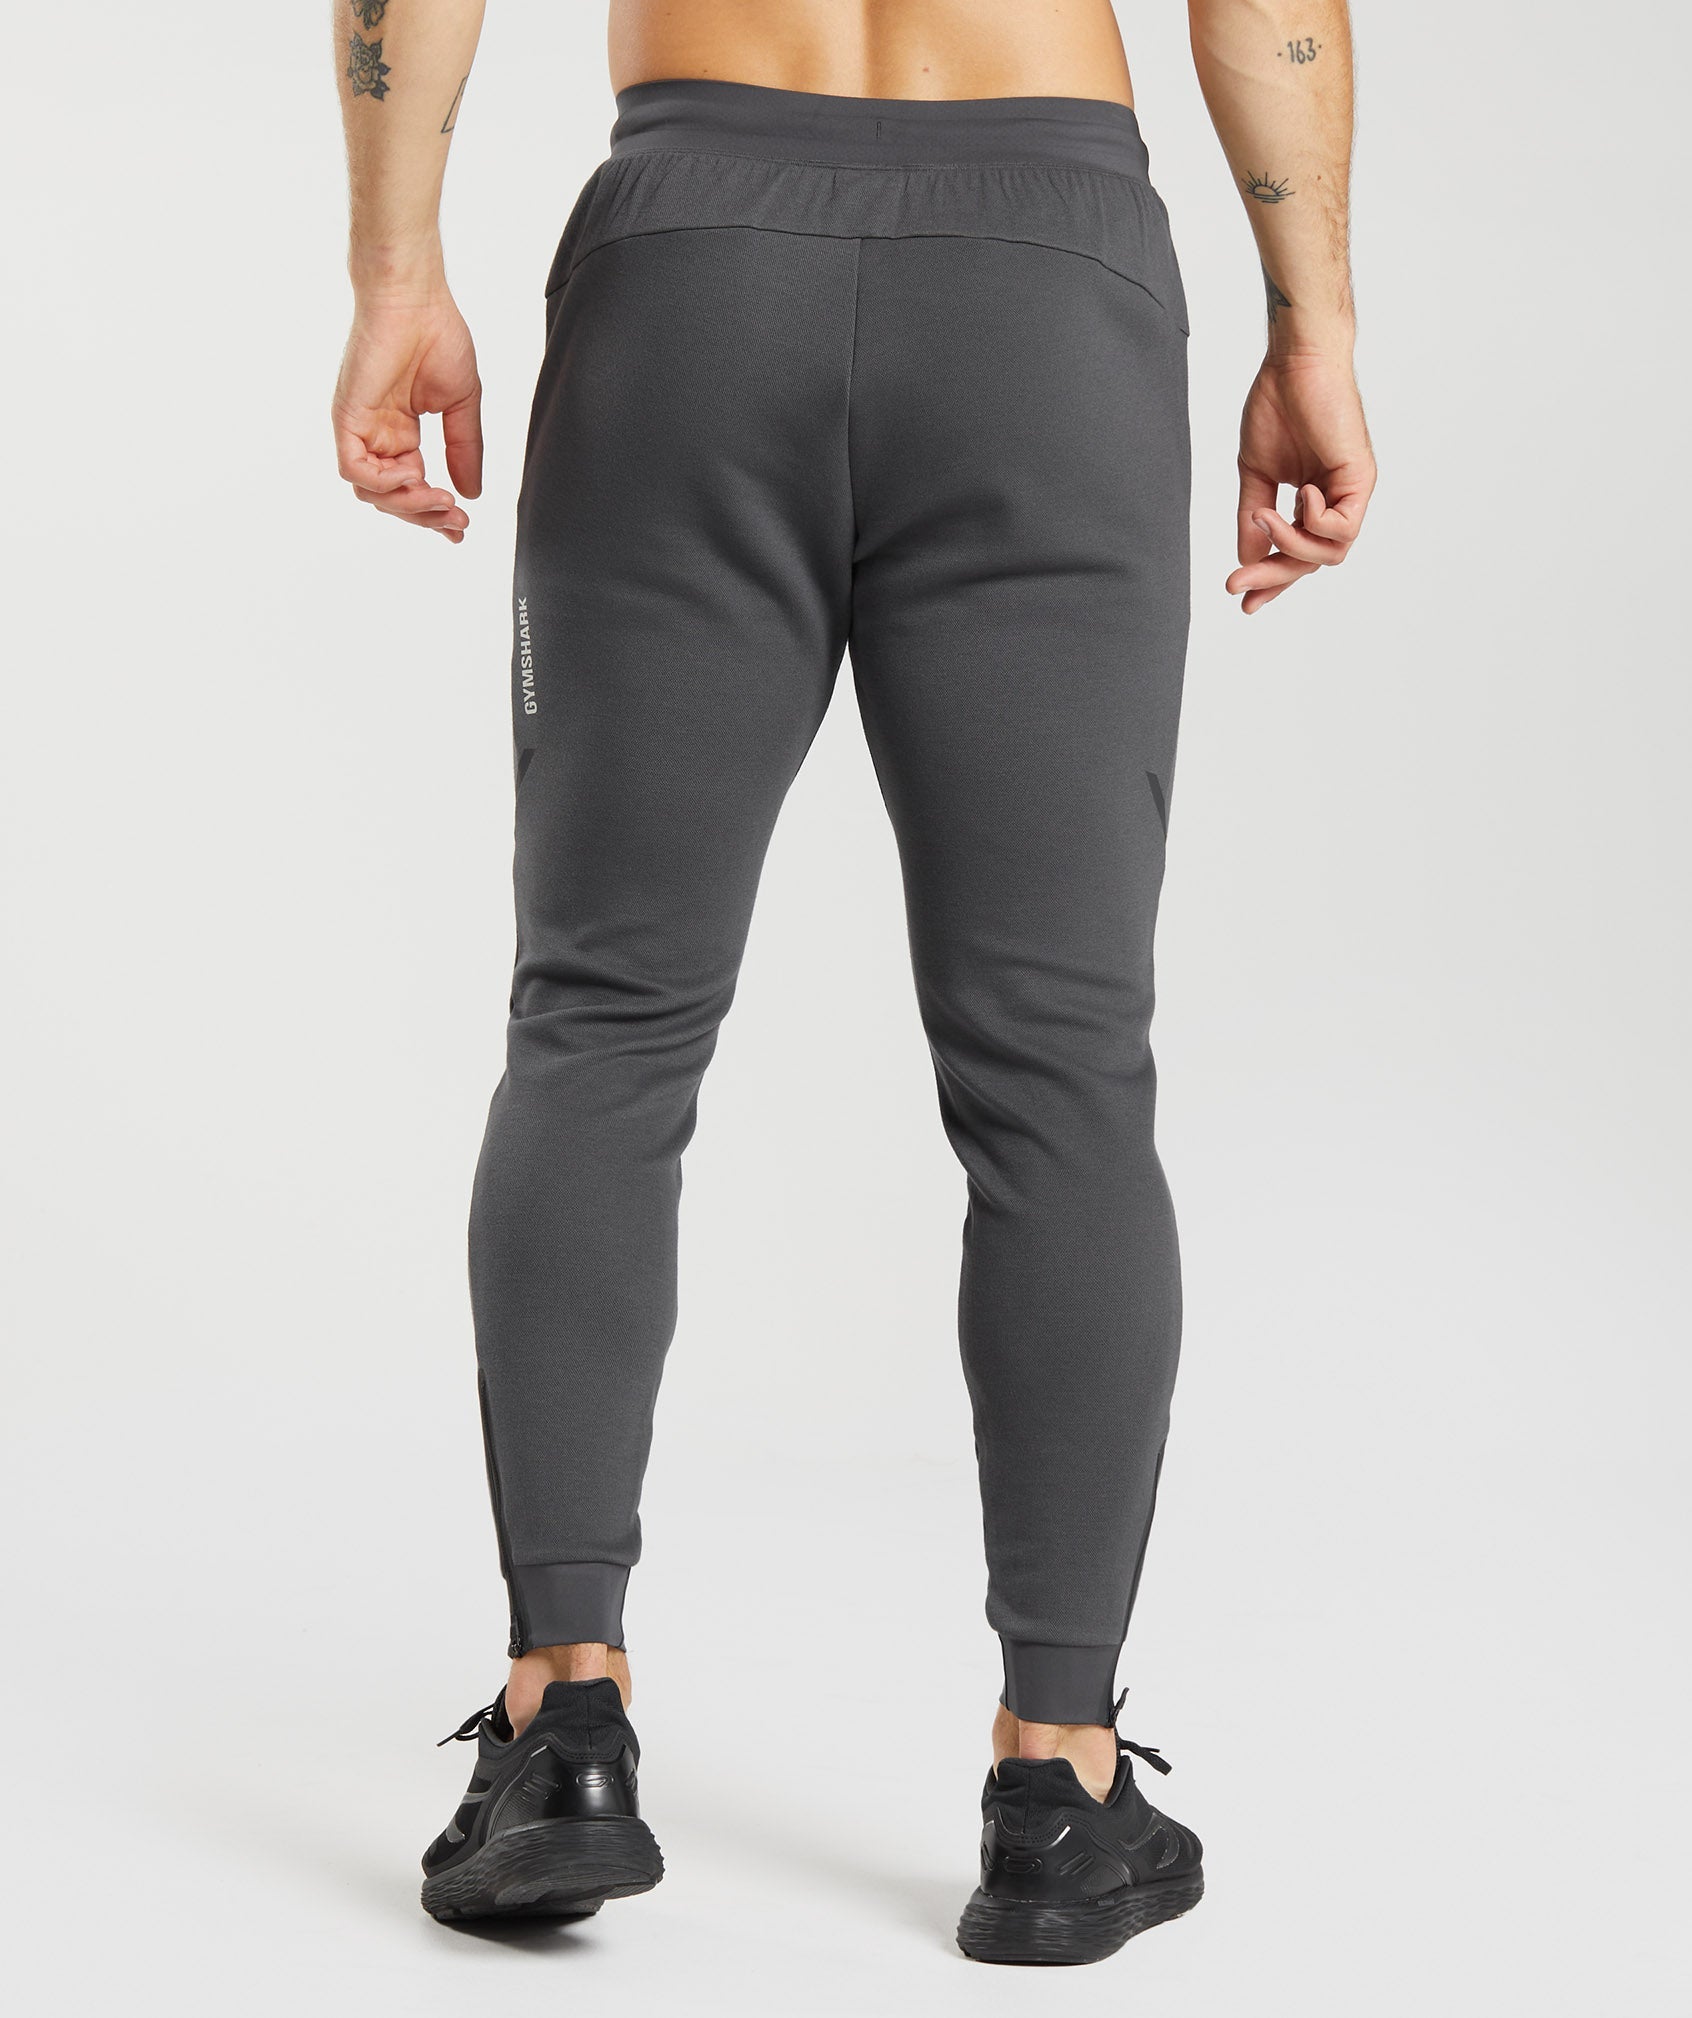 Apex Technical Joggers in Onyx Grey - view 5